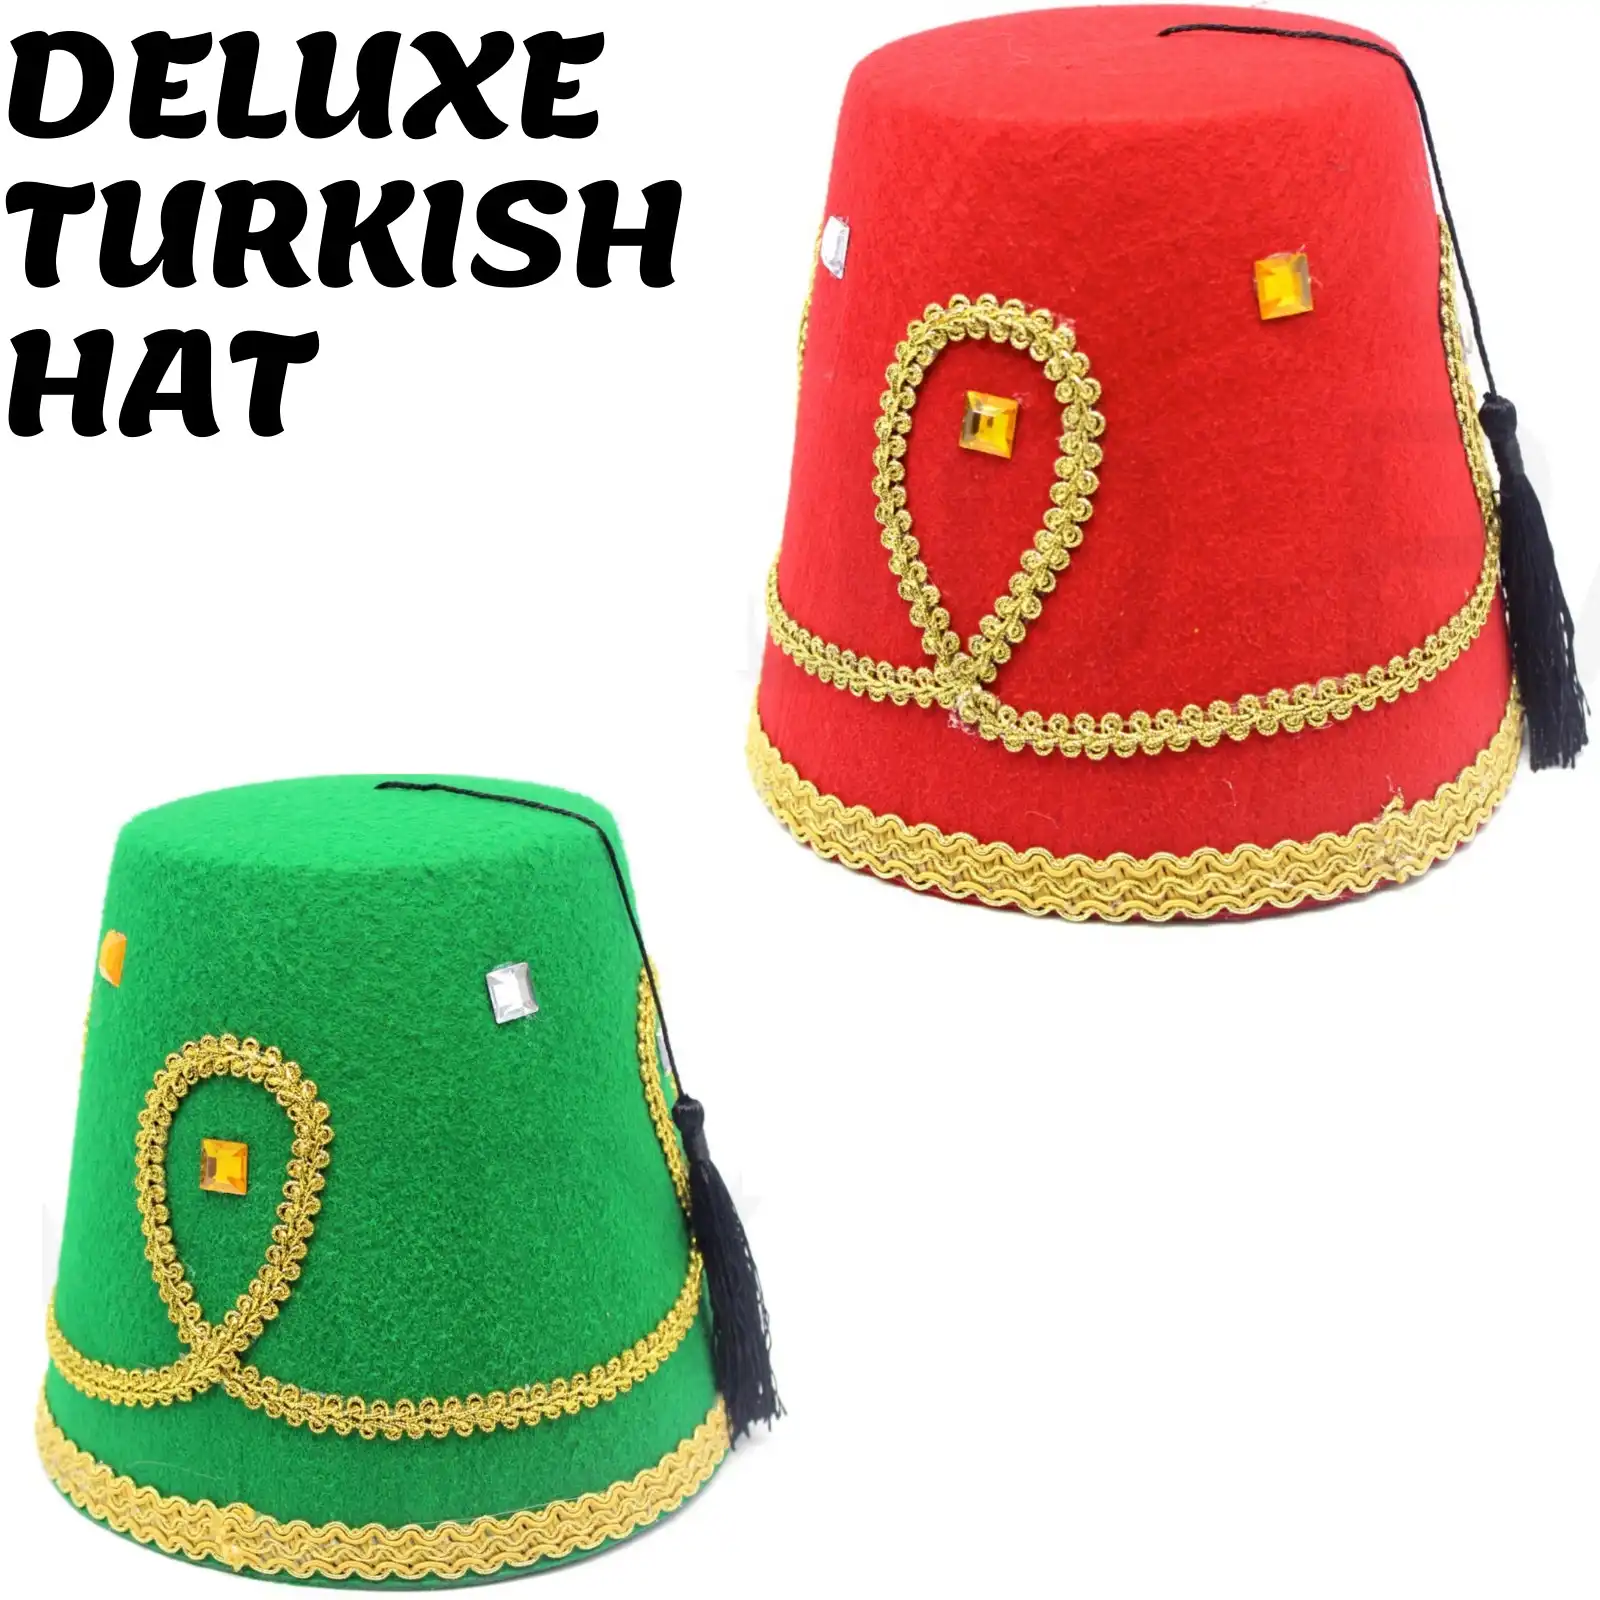 DELUXE TURKISH HAT Red Green Fez Tarboosh Dress Up Costume Party Moroccan